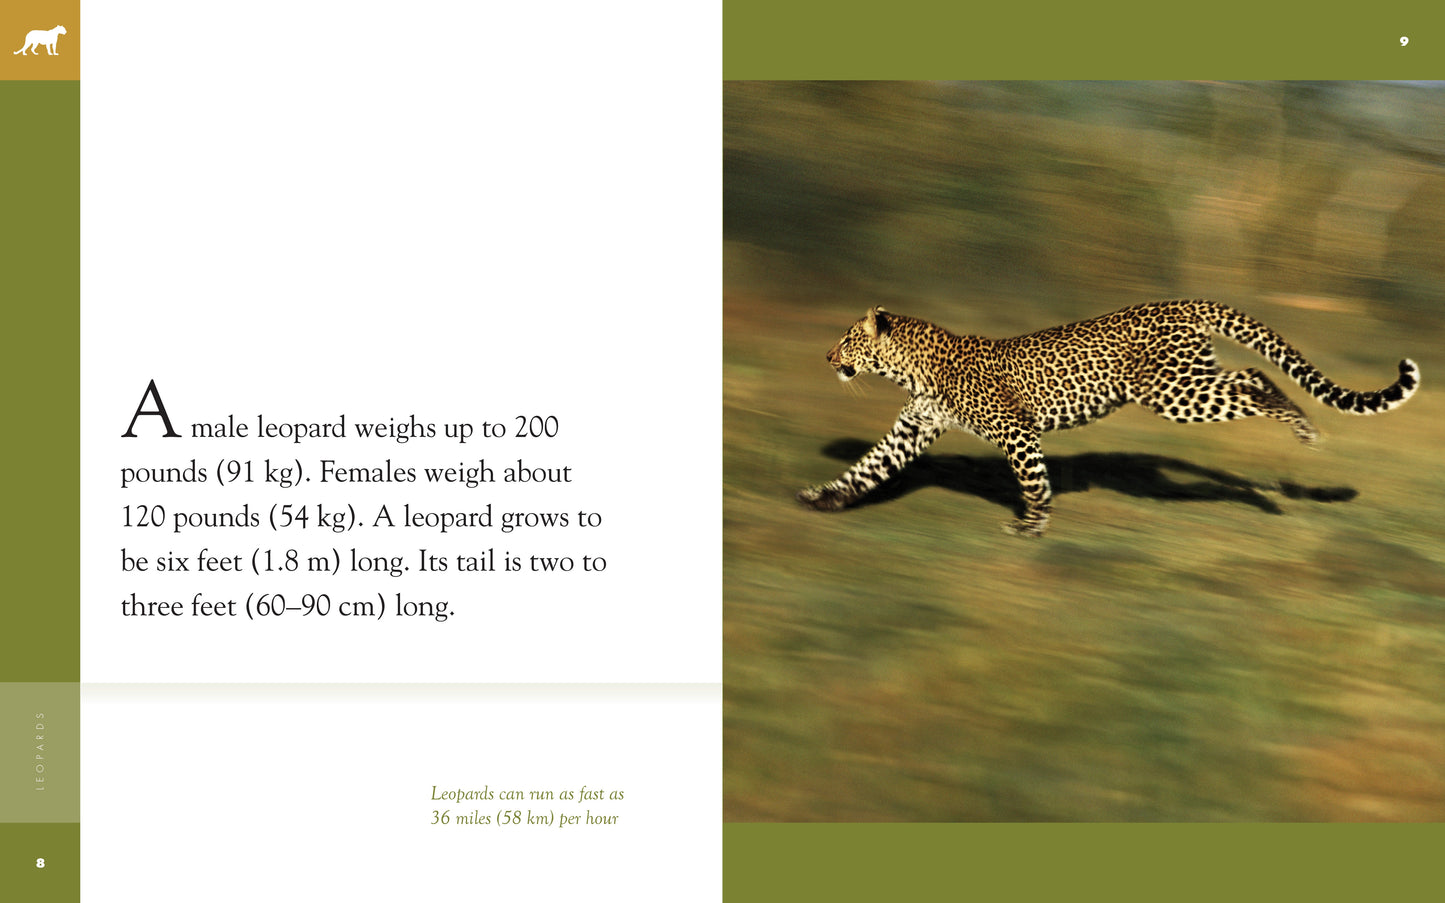 Amazing Animals - Classic Edition: Leopards by The Creative Company Shop